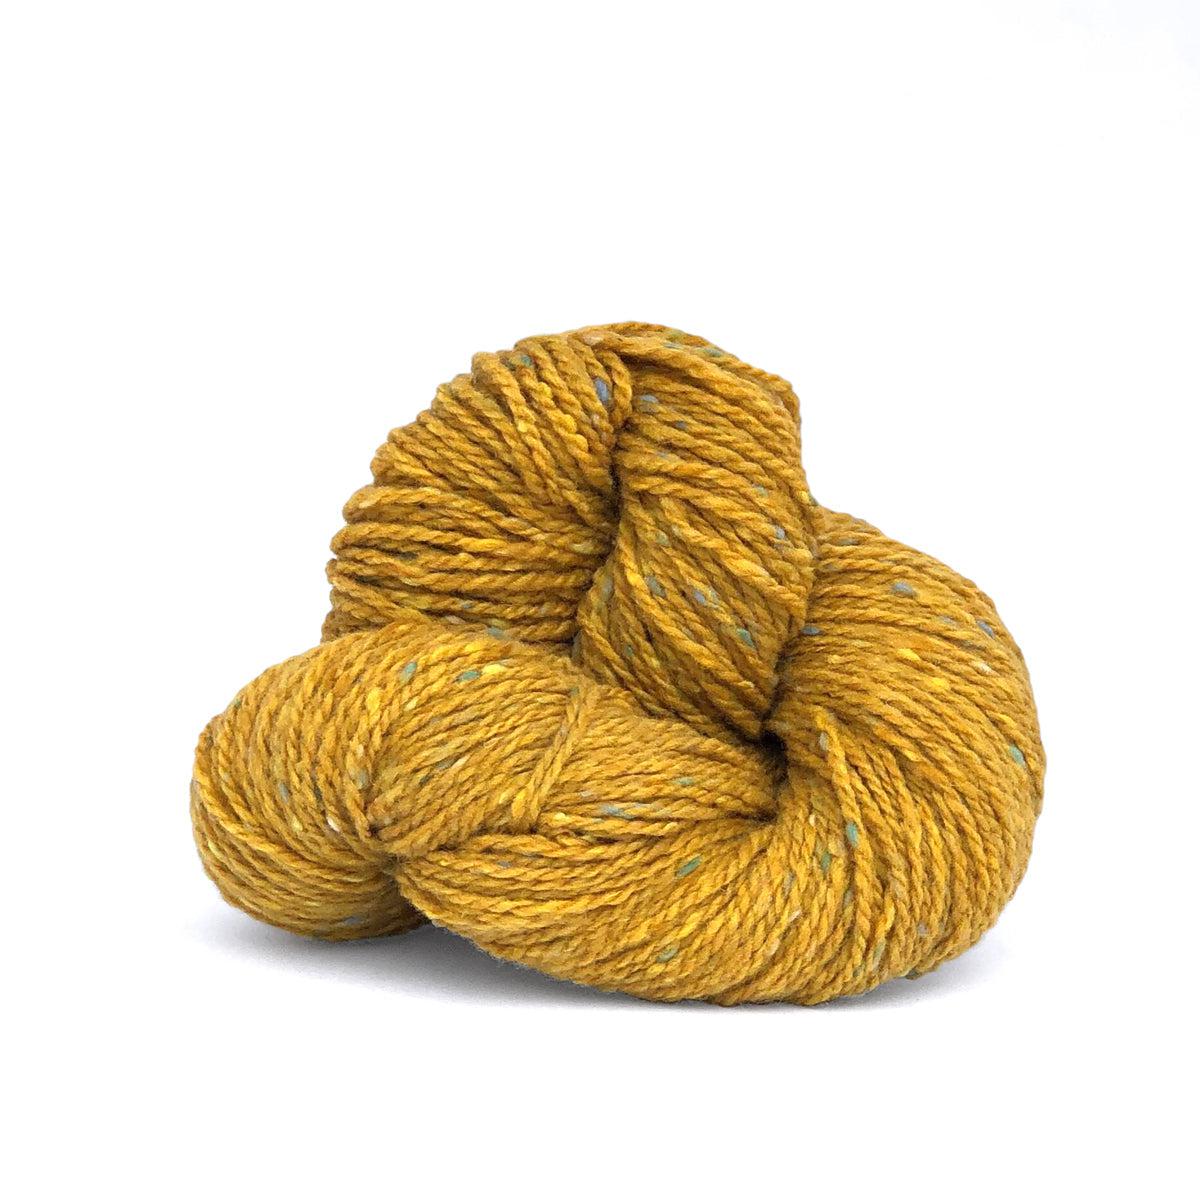 A skein of Kelbourne Woolens Lucky Tweed Golden, a mustard yellow with green and blue flecks.